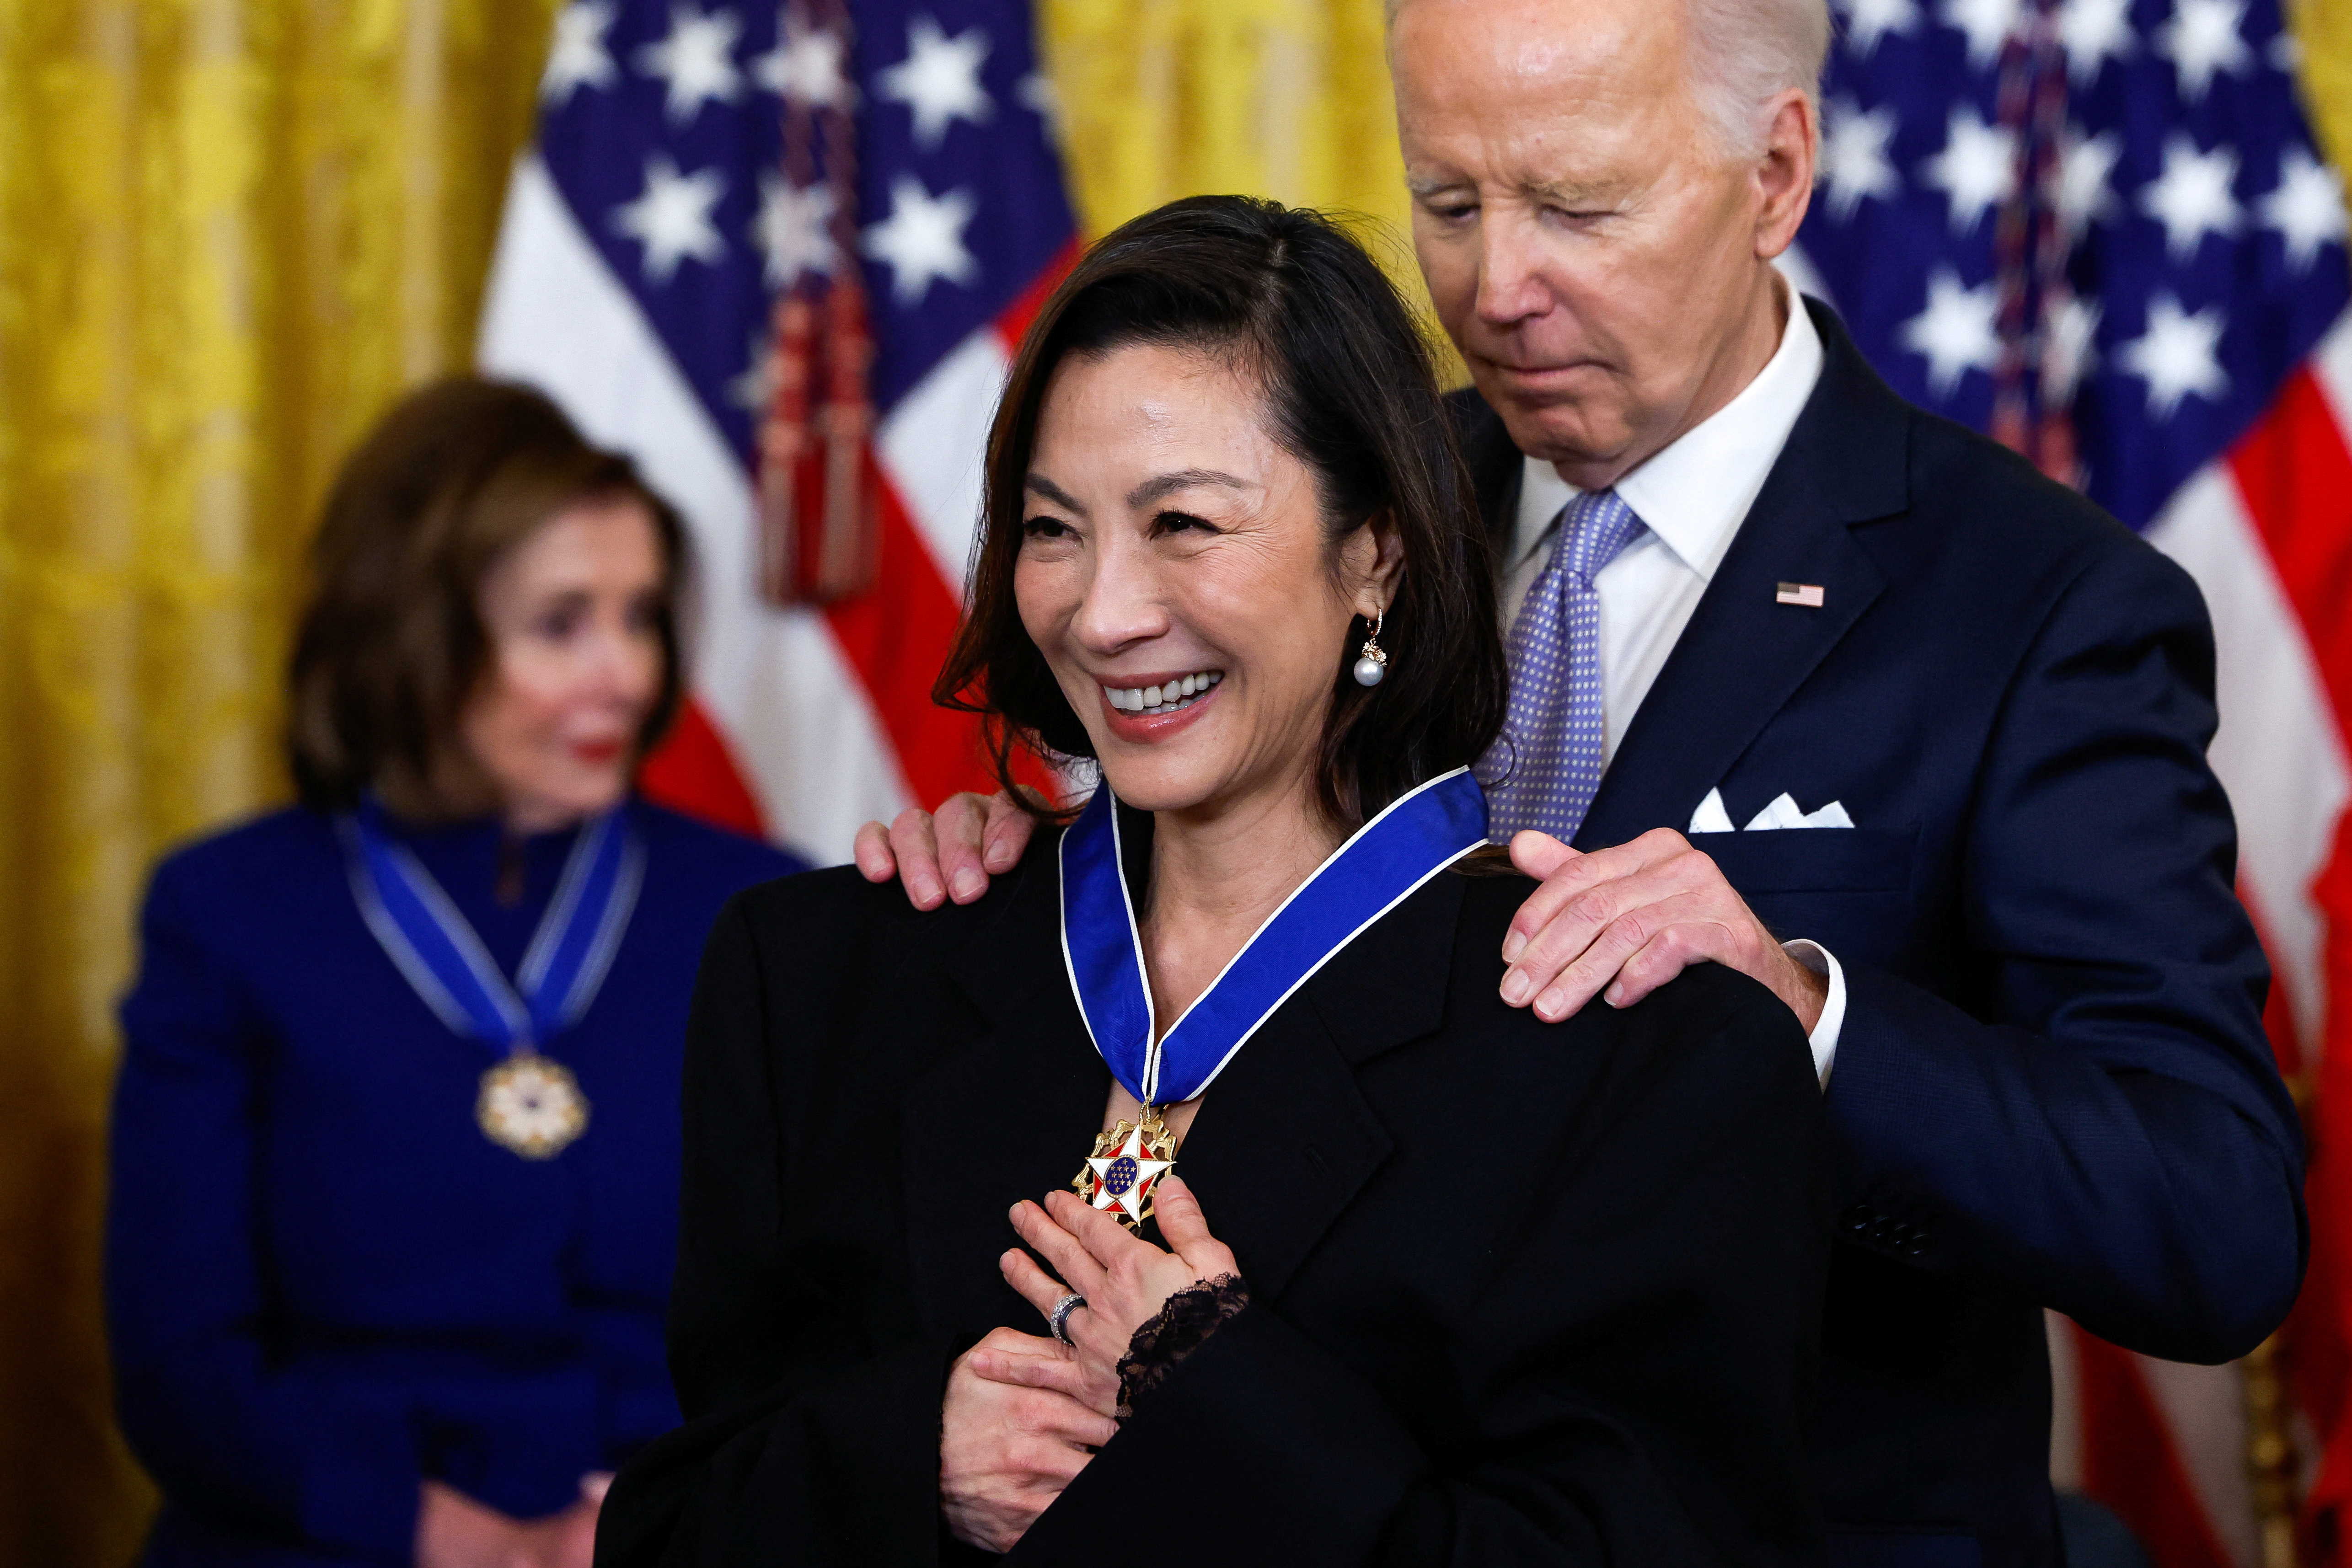 U.S. President Biden holds the Presidential Medal of Freedom ceremony at the White House in Washington